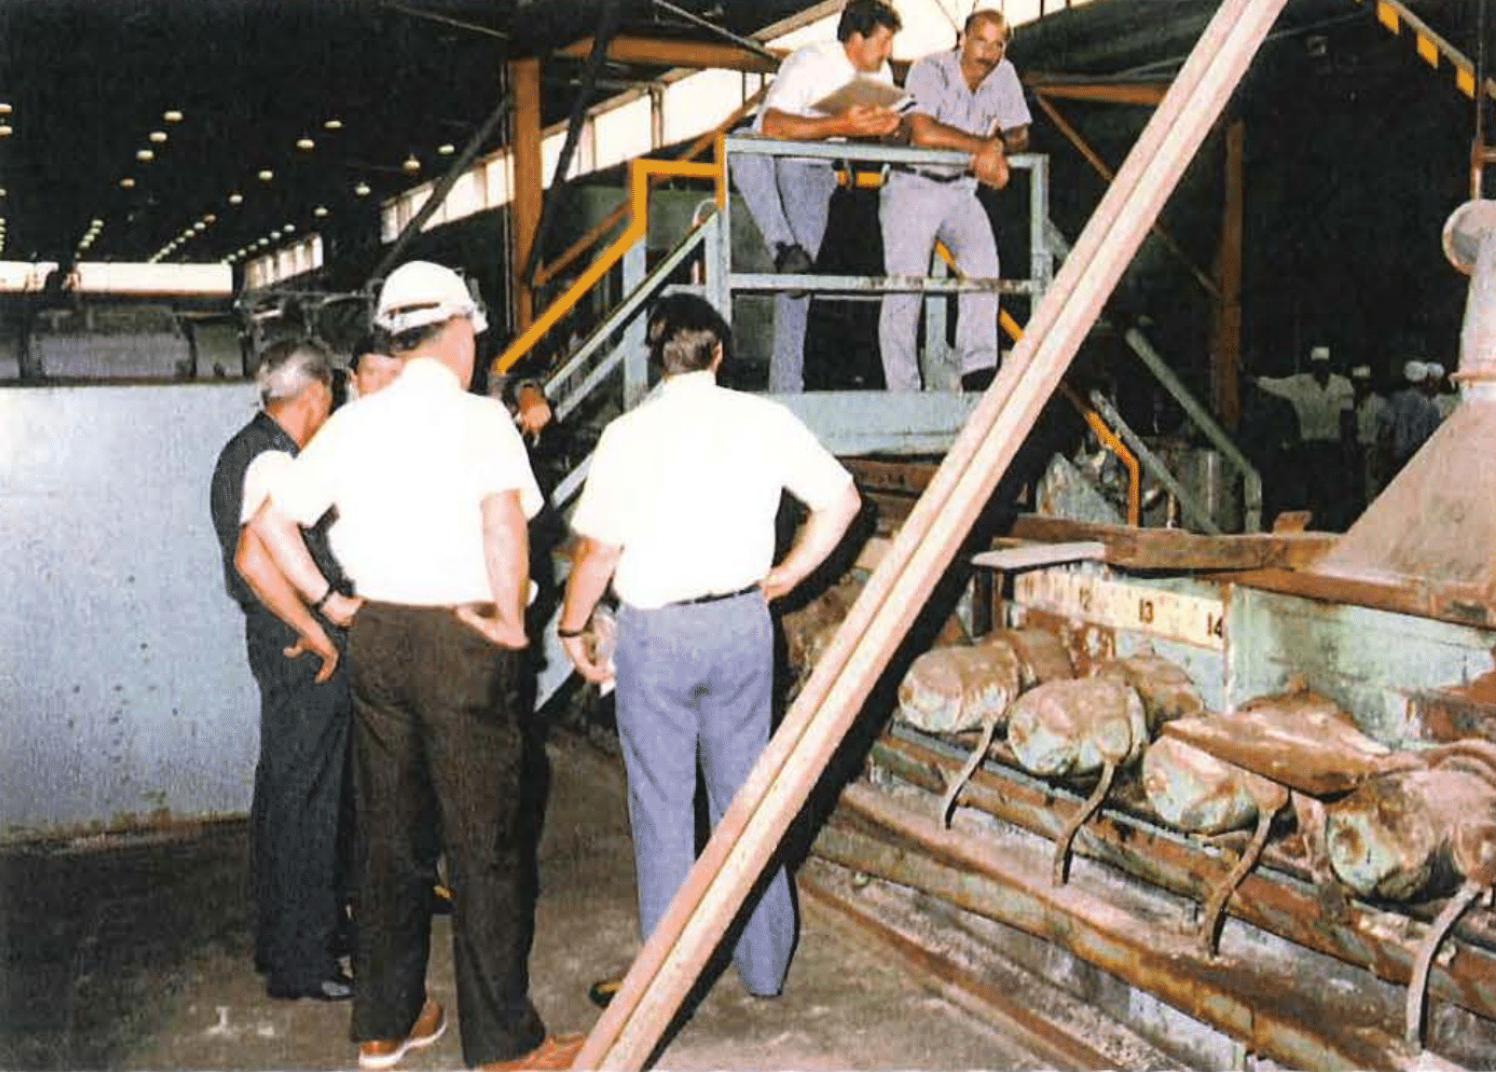 Workers stand near the salt vat inside of Plant 6 at the Fernald Feed Material Production Center after it was drained following the disappearance of Bocks.